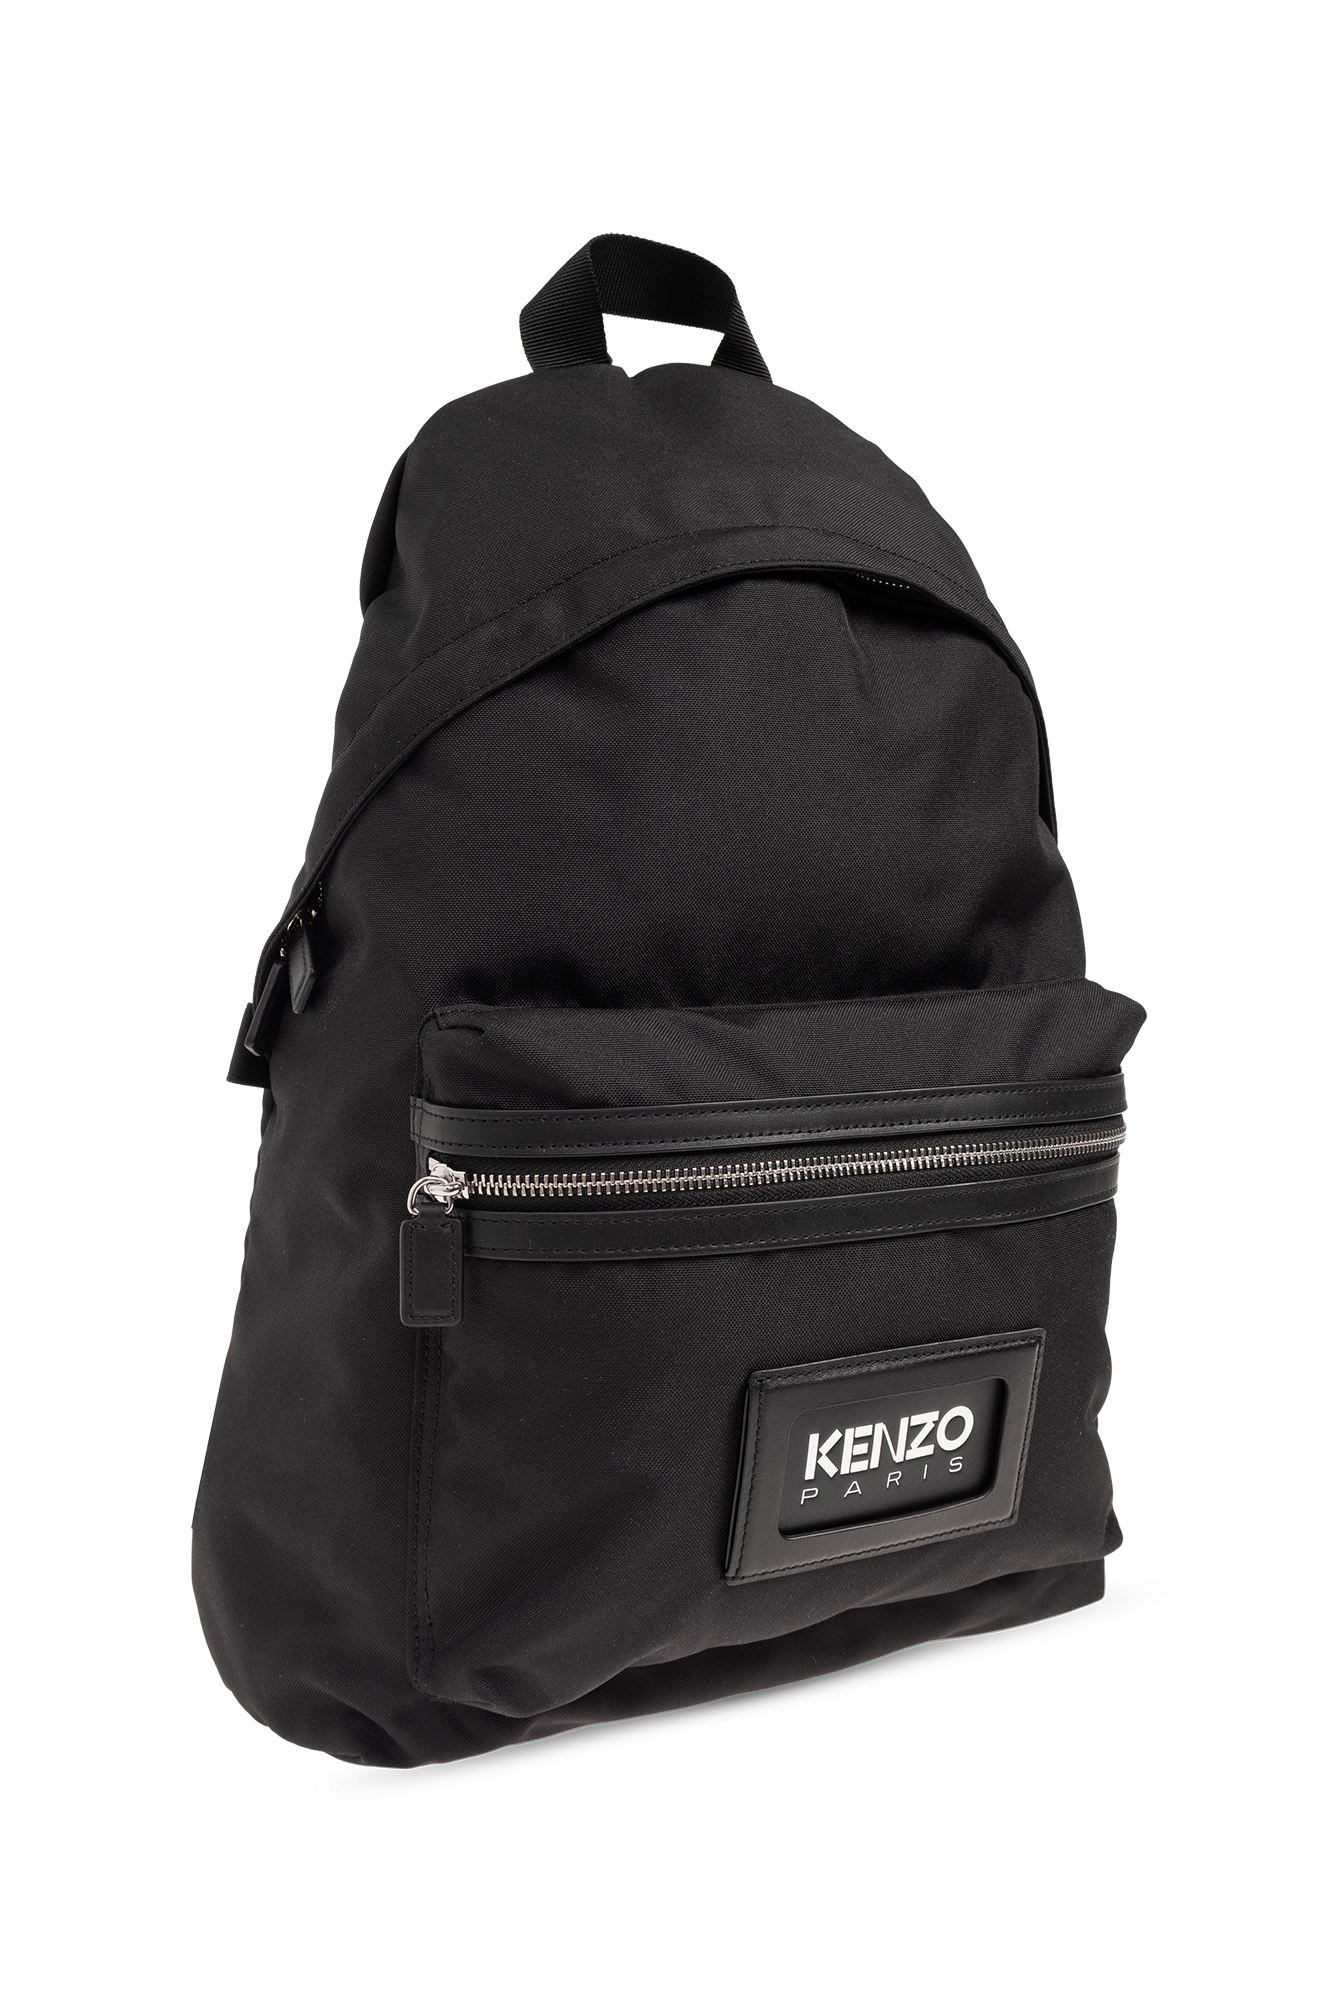 Kenzo backpack 3rd with logo